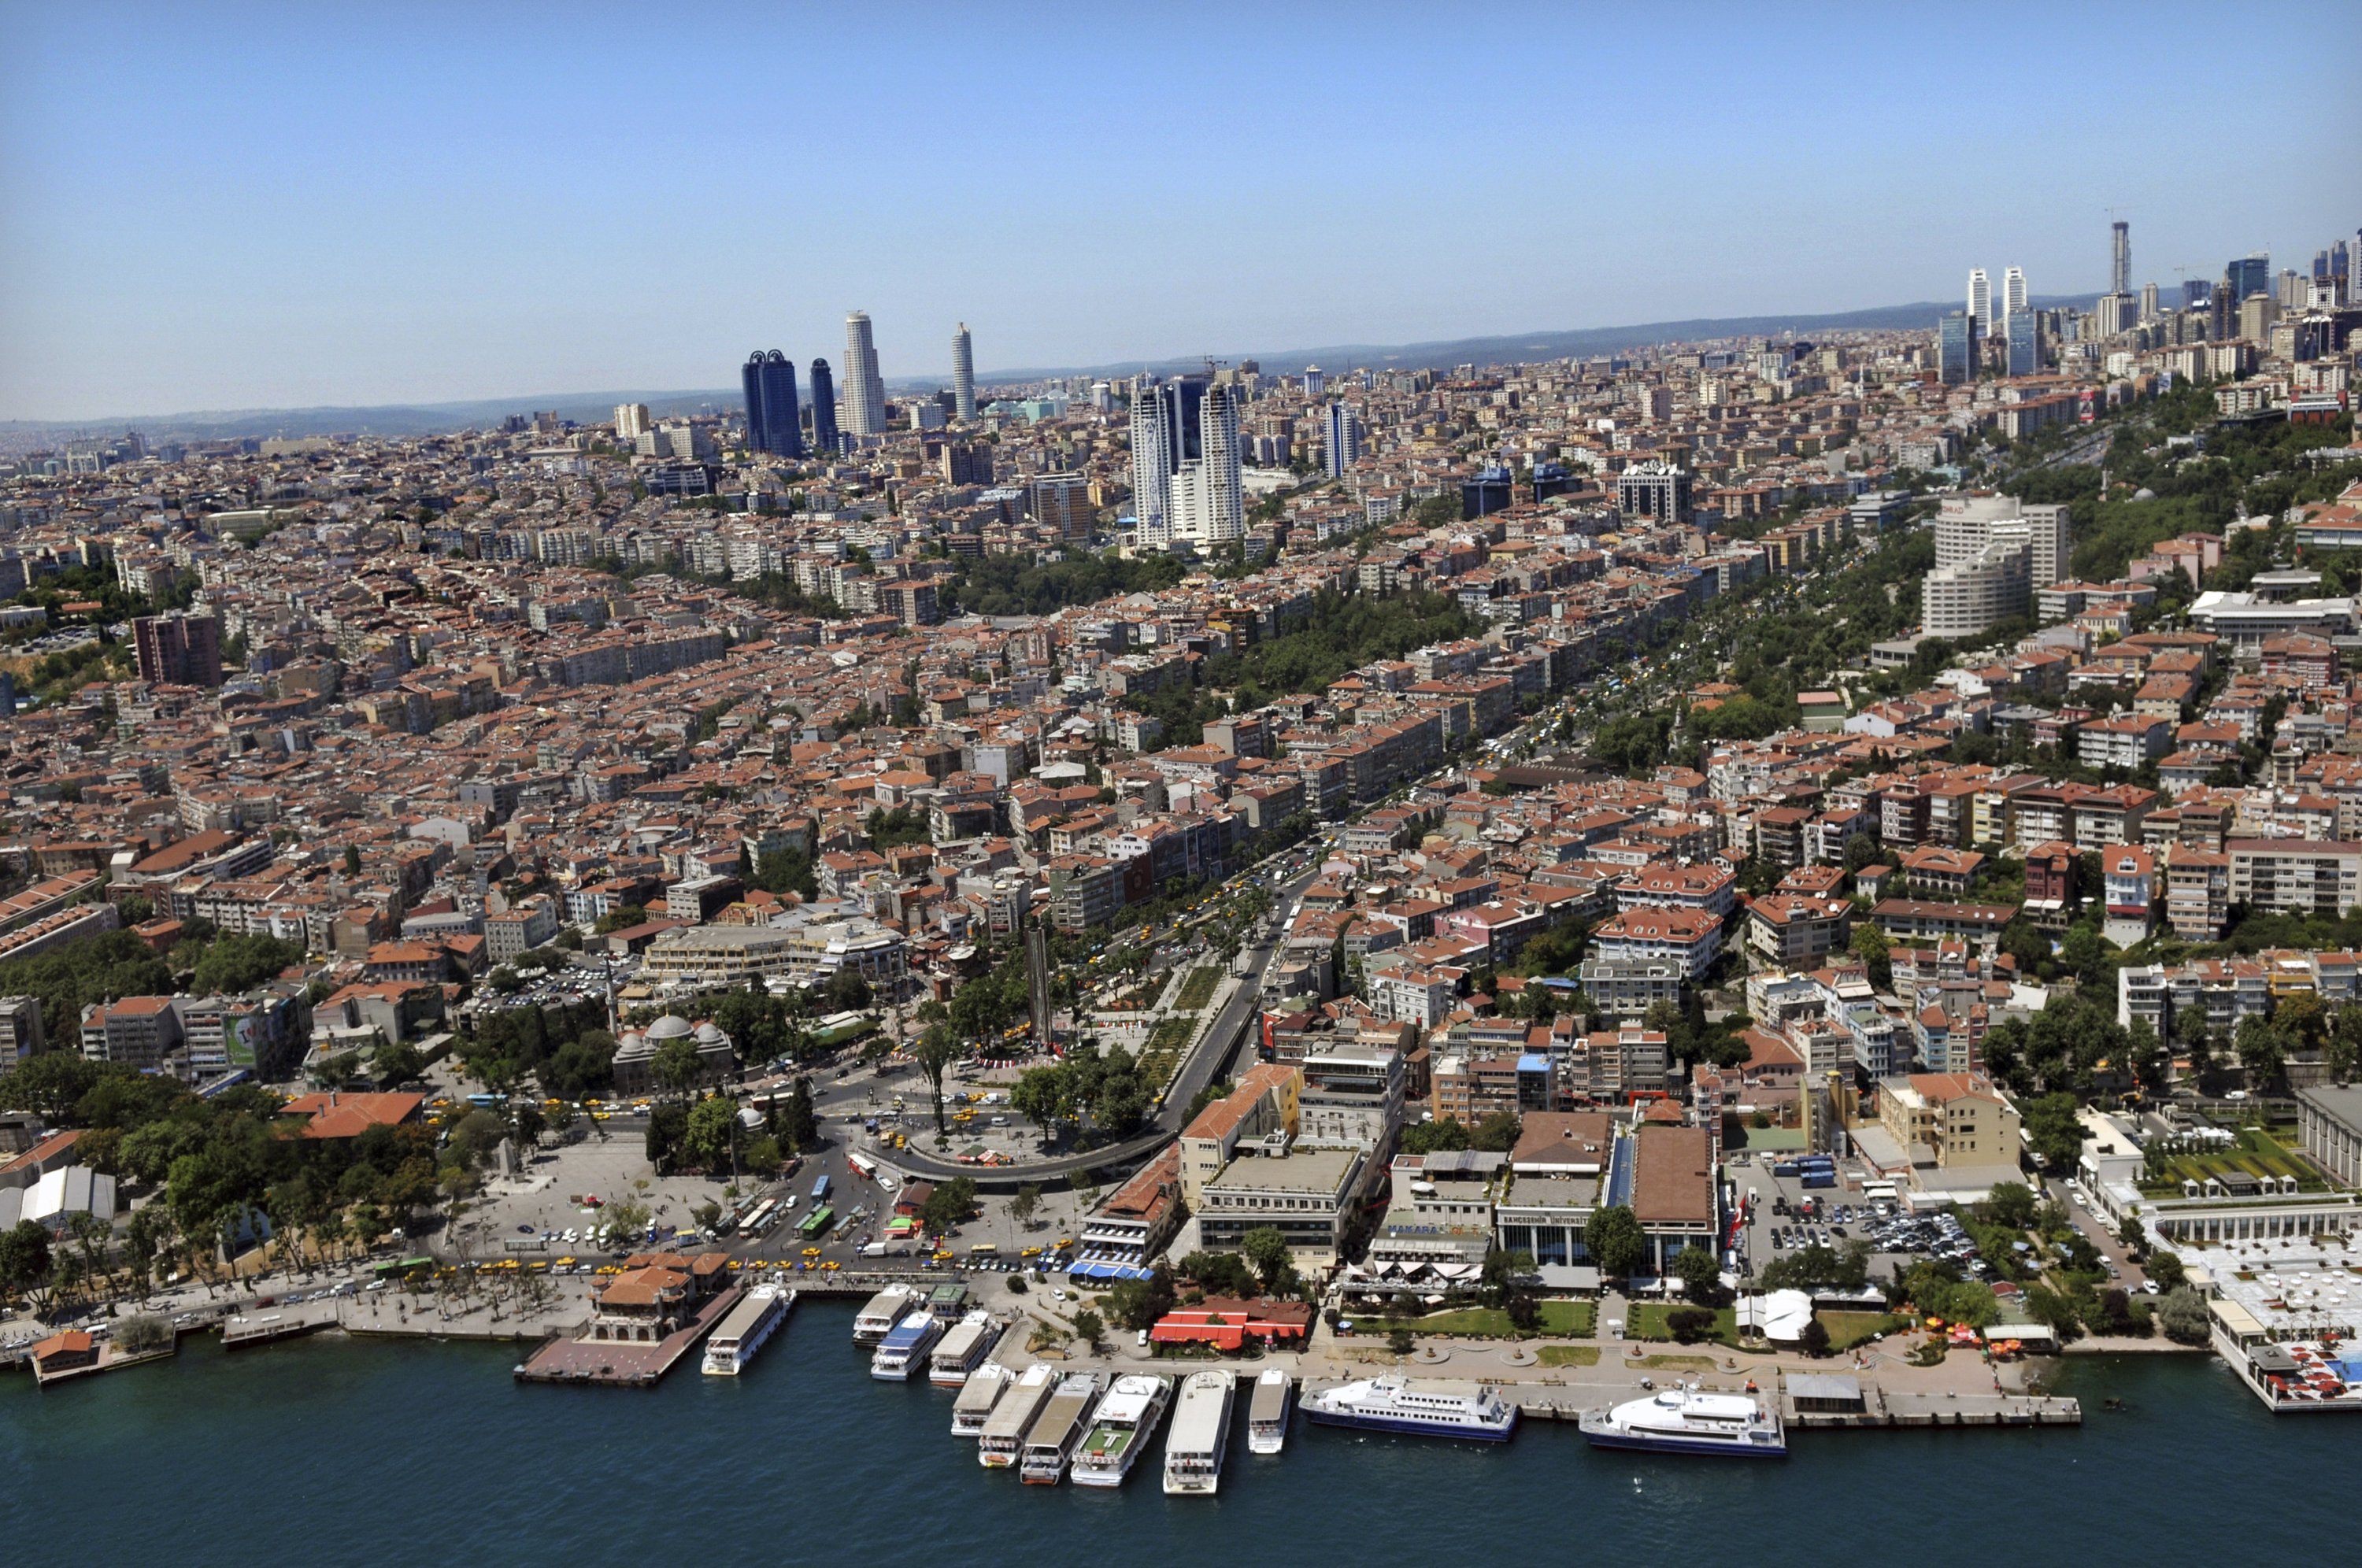 Istanbul earthquake to affect 200,000 buildings, 3 million people | Daily Sabah